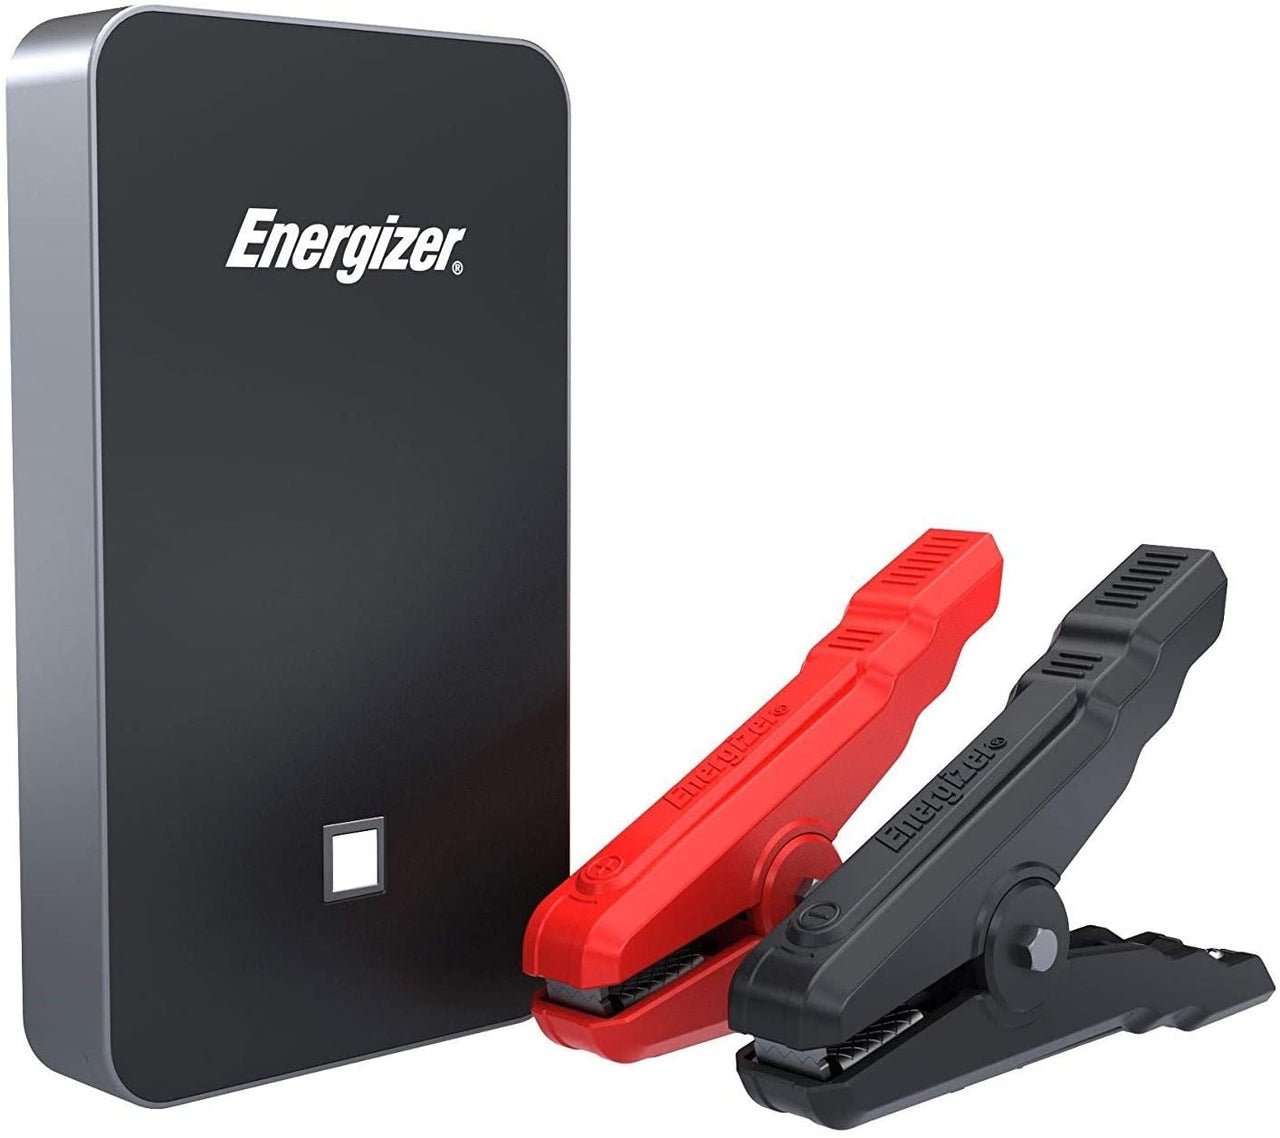 Energizer Heavy Duty Jump Starter 7500mAh with Built-in UL Lithium Battery - Portable Car Jumper and 2.4A Power Bank USB Charger (Black) - Jump-Starters.com roadside assistance store